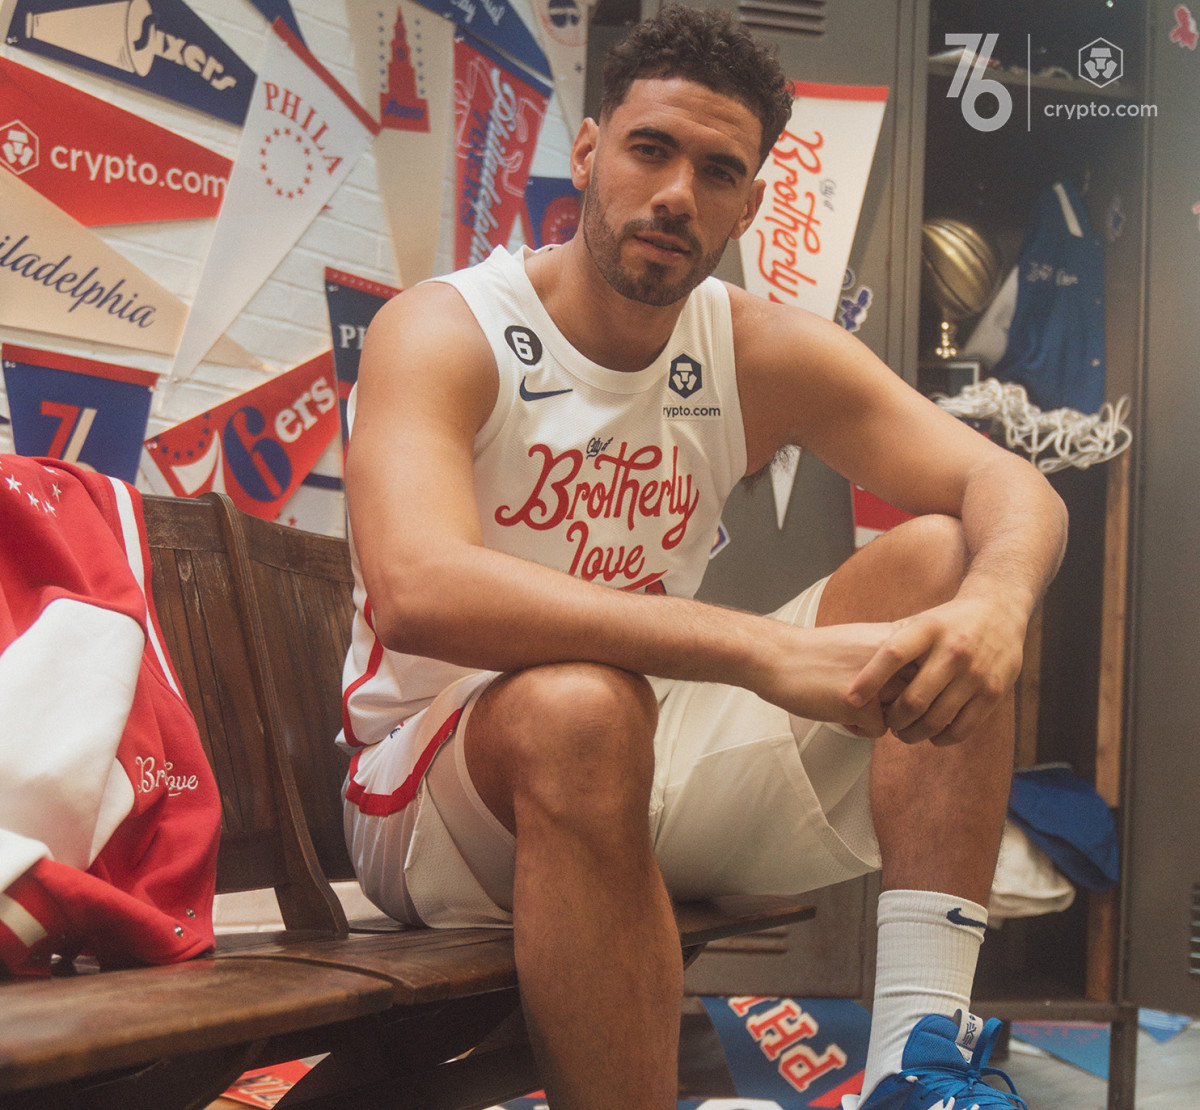 philadelphia 76ers jersey outfit